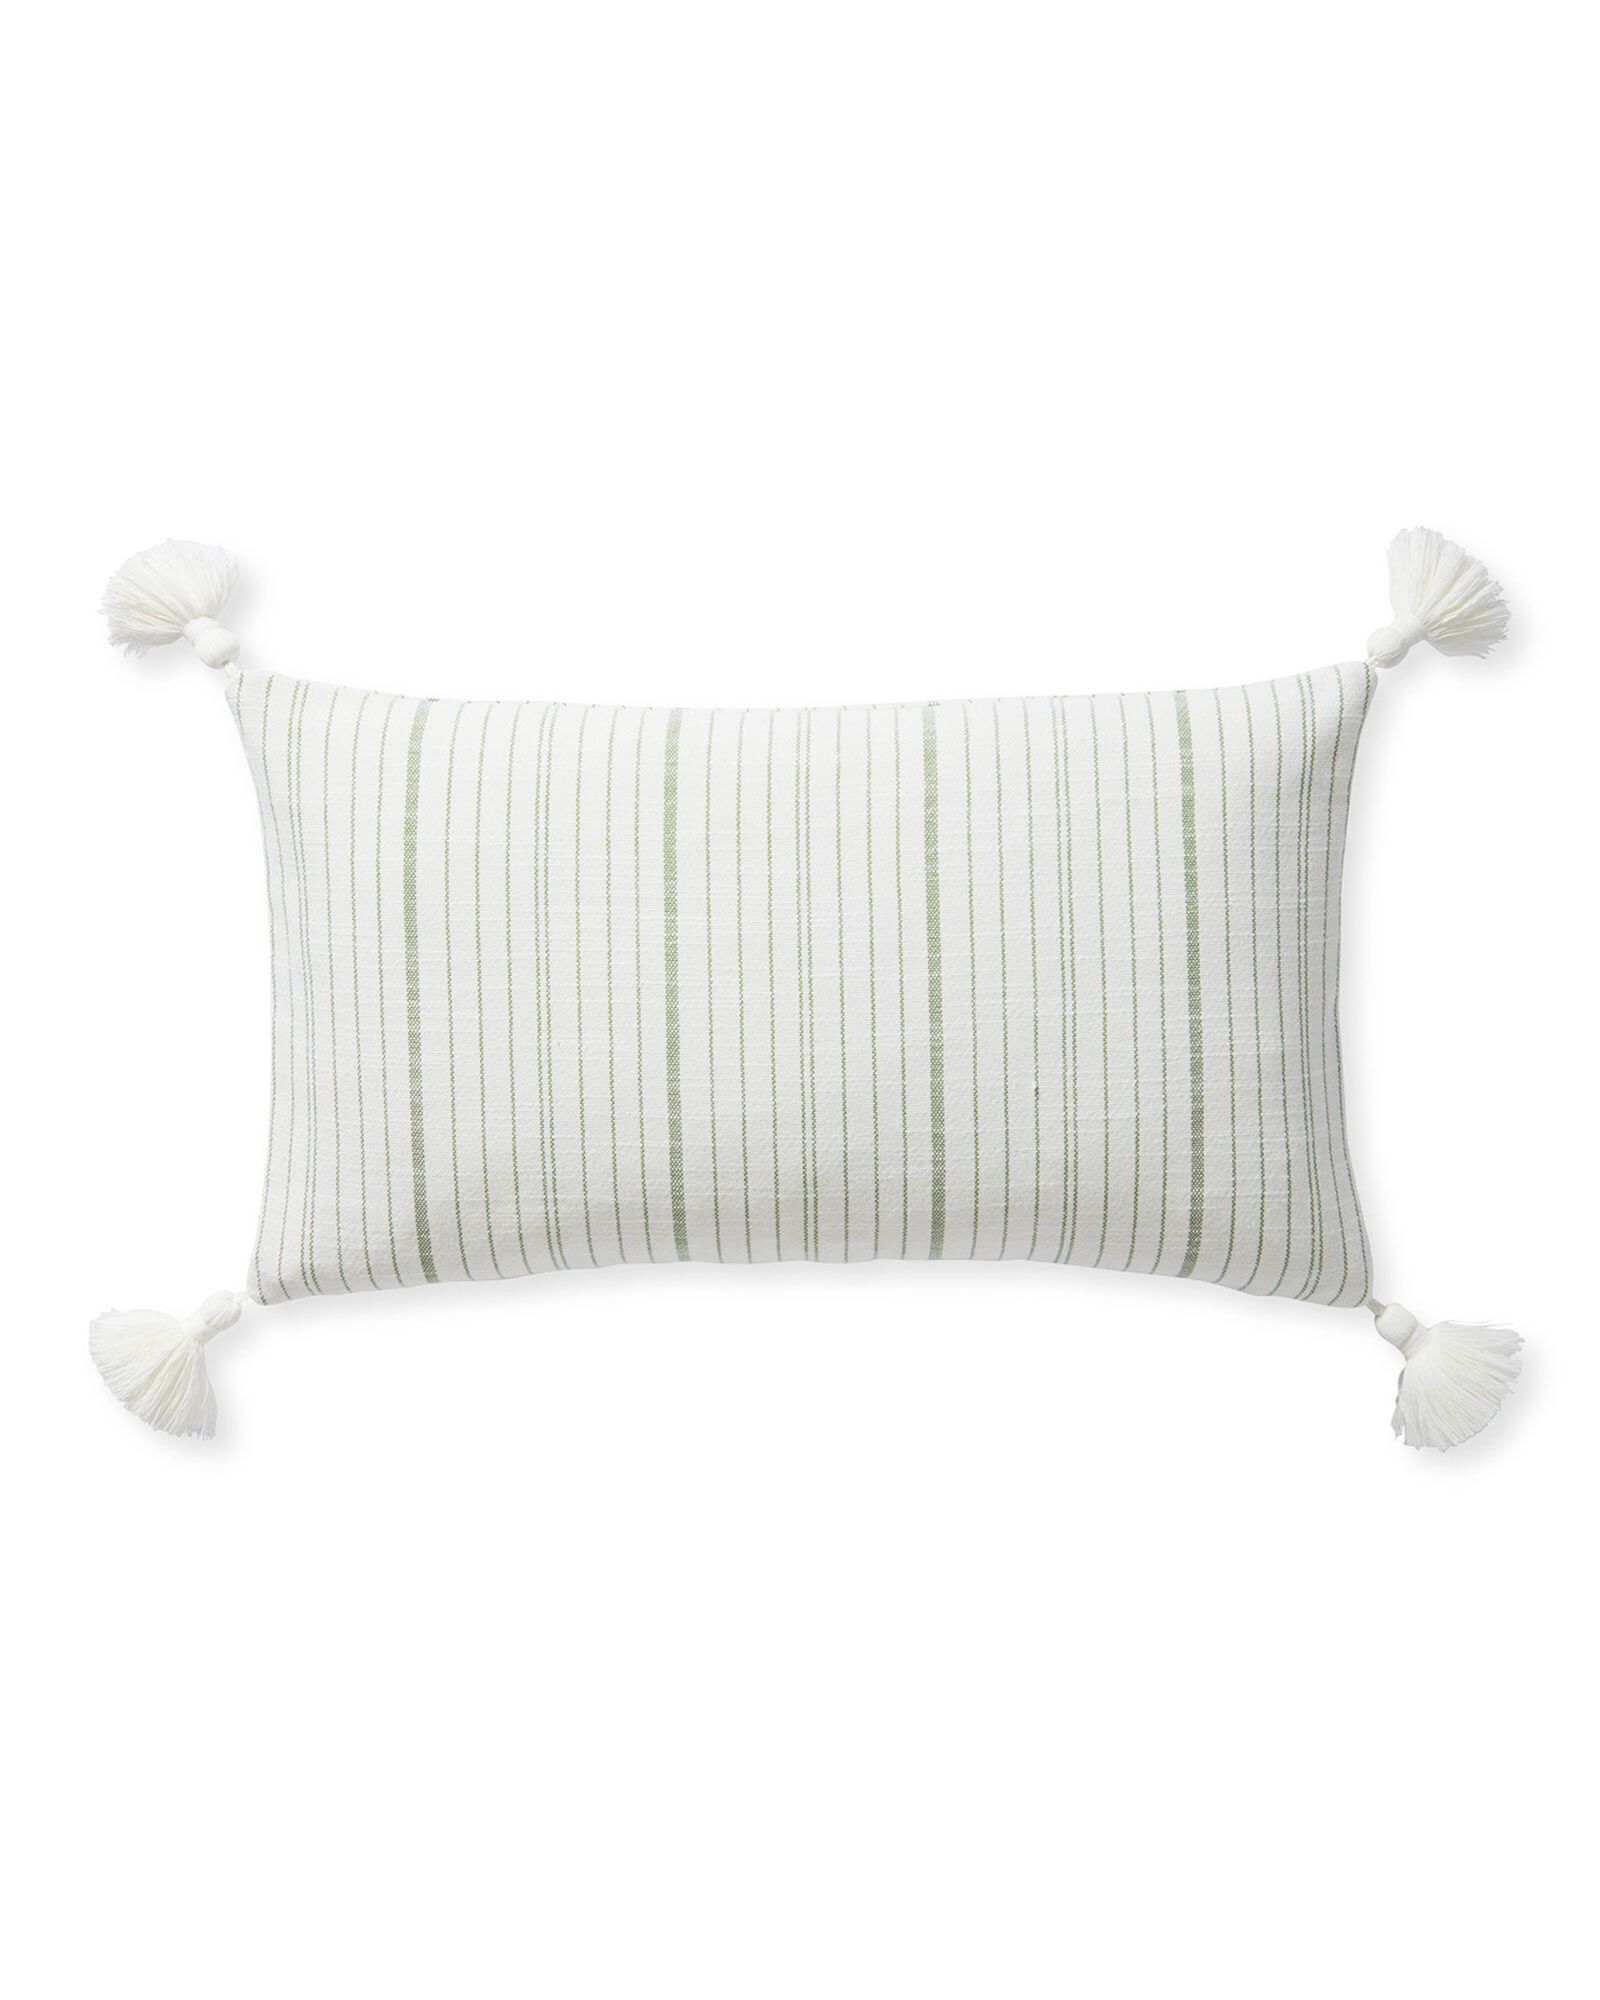 Surf Stripe Pillow Cover - Green | Serena and Lily